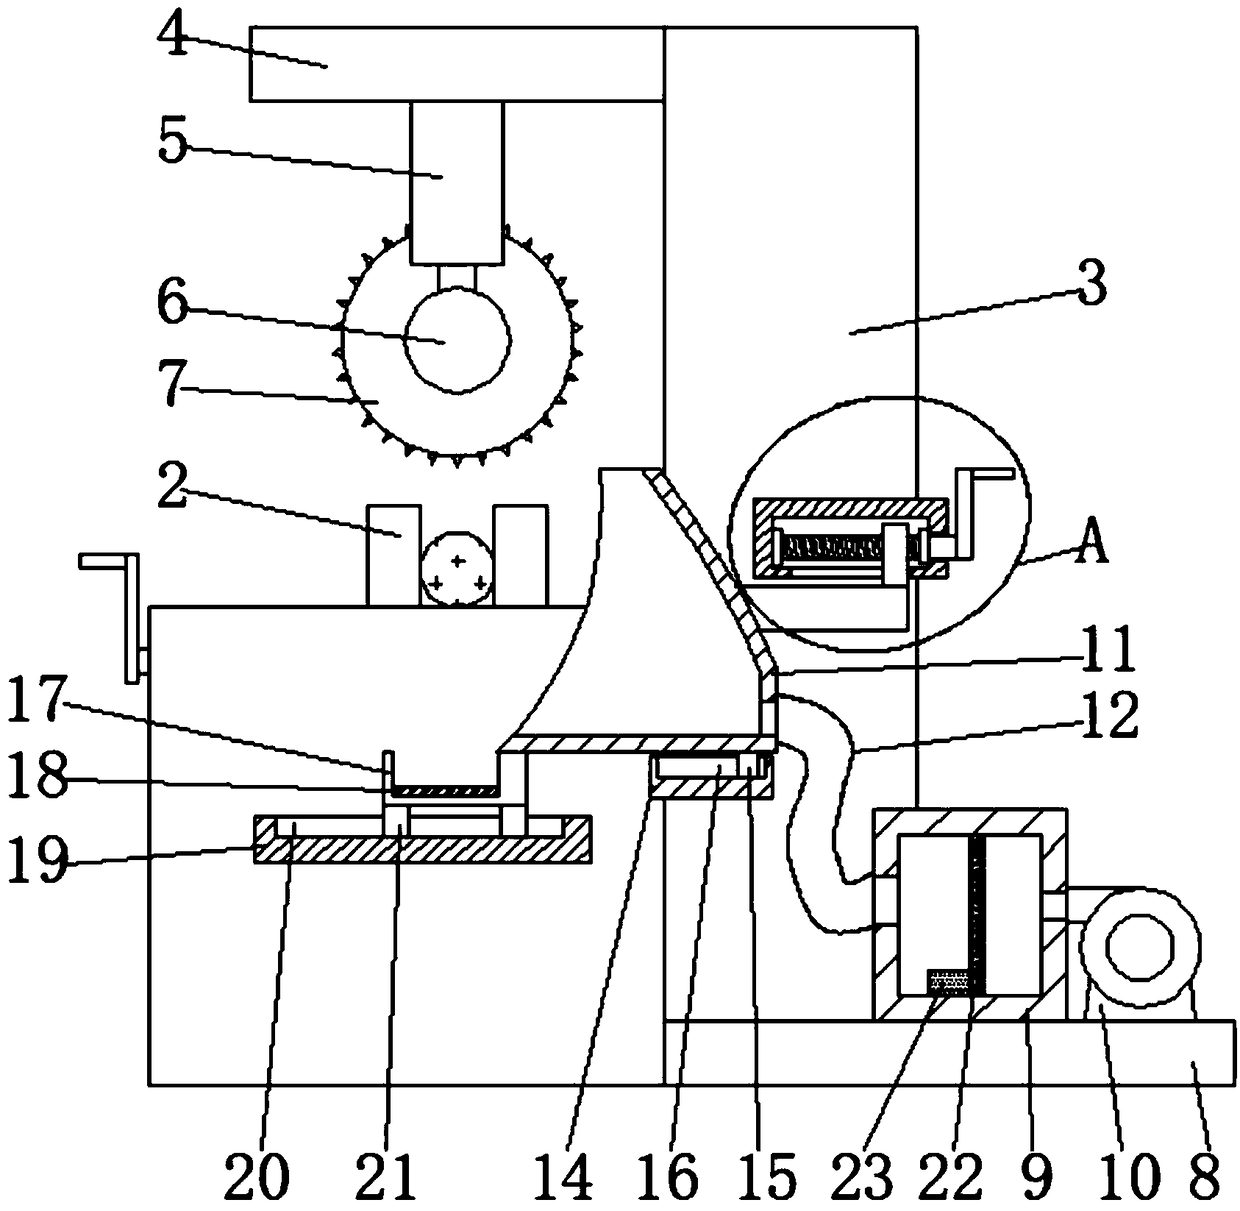 Environment-friendly cutting device for machining mechanical parts